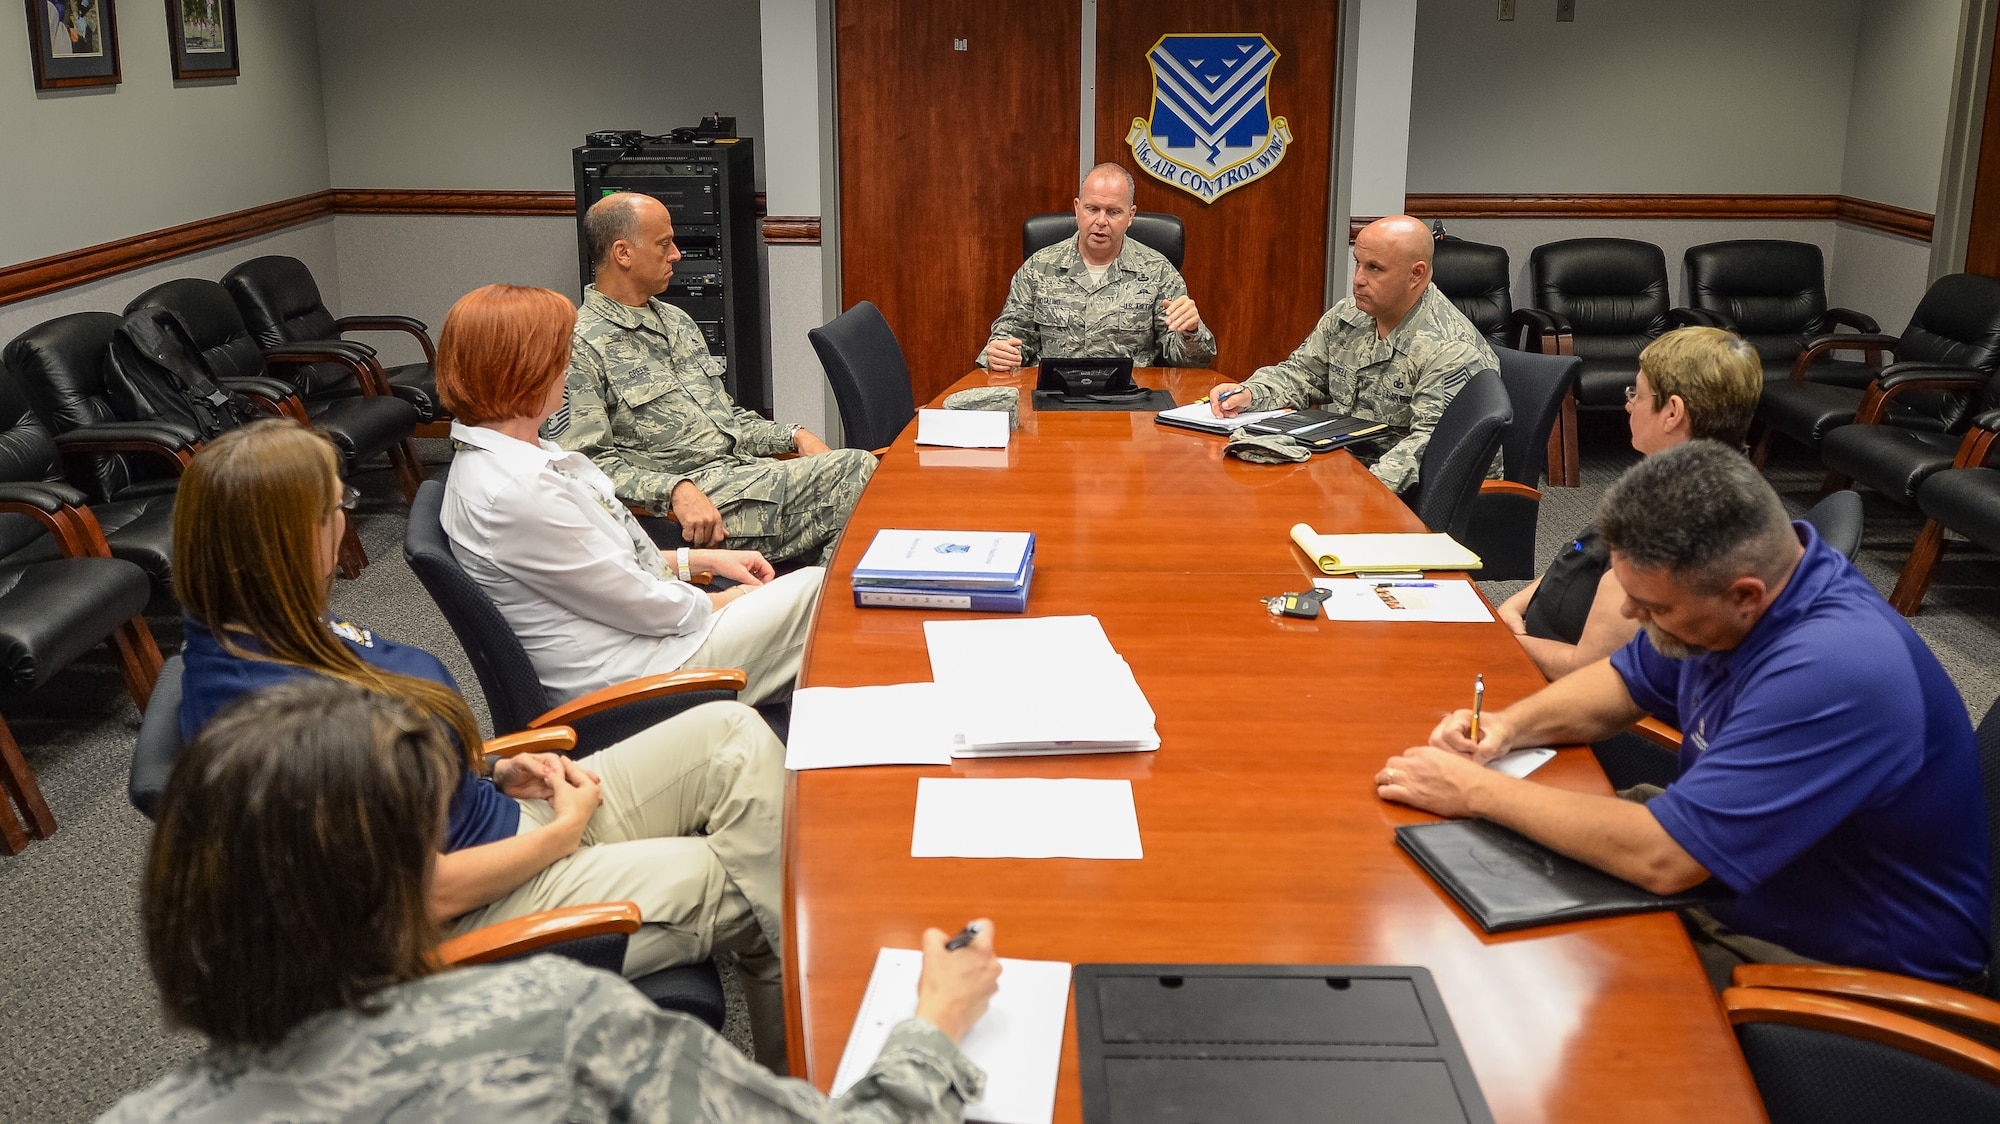 U.S. Air Force Chief Master Sgt. James W. Hotaling, Air National Guard command chief, talks with leaders from the 116th Air Control Wing (ACW), Georgia Air National Guard, Family Readiness, Psychological Health, Yellow Ribbon, Wing Chief of Staff, Public Affairs and the 116th ACW command chief about resiliency and how their departments are doing during a visit to Robins Air Force Base, Ga., July 16, 2015. During his visit, Hotaling conducted two town hall style meetings and met with key enlisted leadership councils and Airmen resiliency representatives. His time with the Airmen focused on sharing his message of a renewed commitment to the profession of arms, health of the force, and recognition of our Airmen and accomplishments. The visit offered the opportunity for Airmen in the wing to meet their top leader, share their concerns and gain perspective from the national level. (U.S. Air National Guard photo by Tech. Sgt. Regina Young/Released)